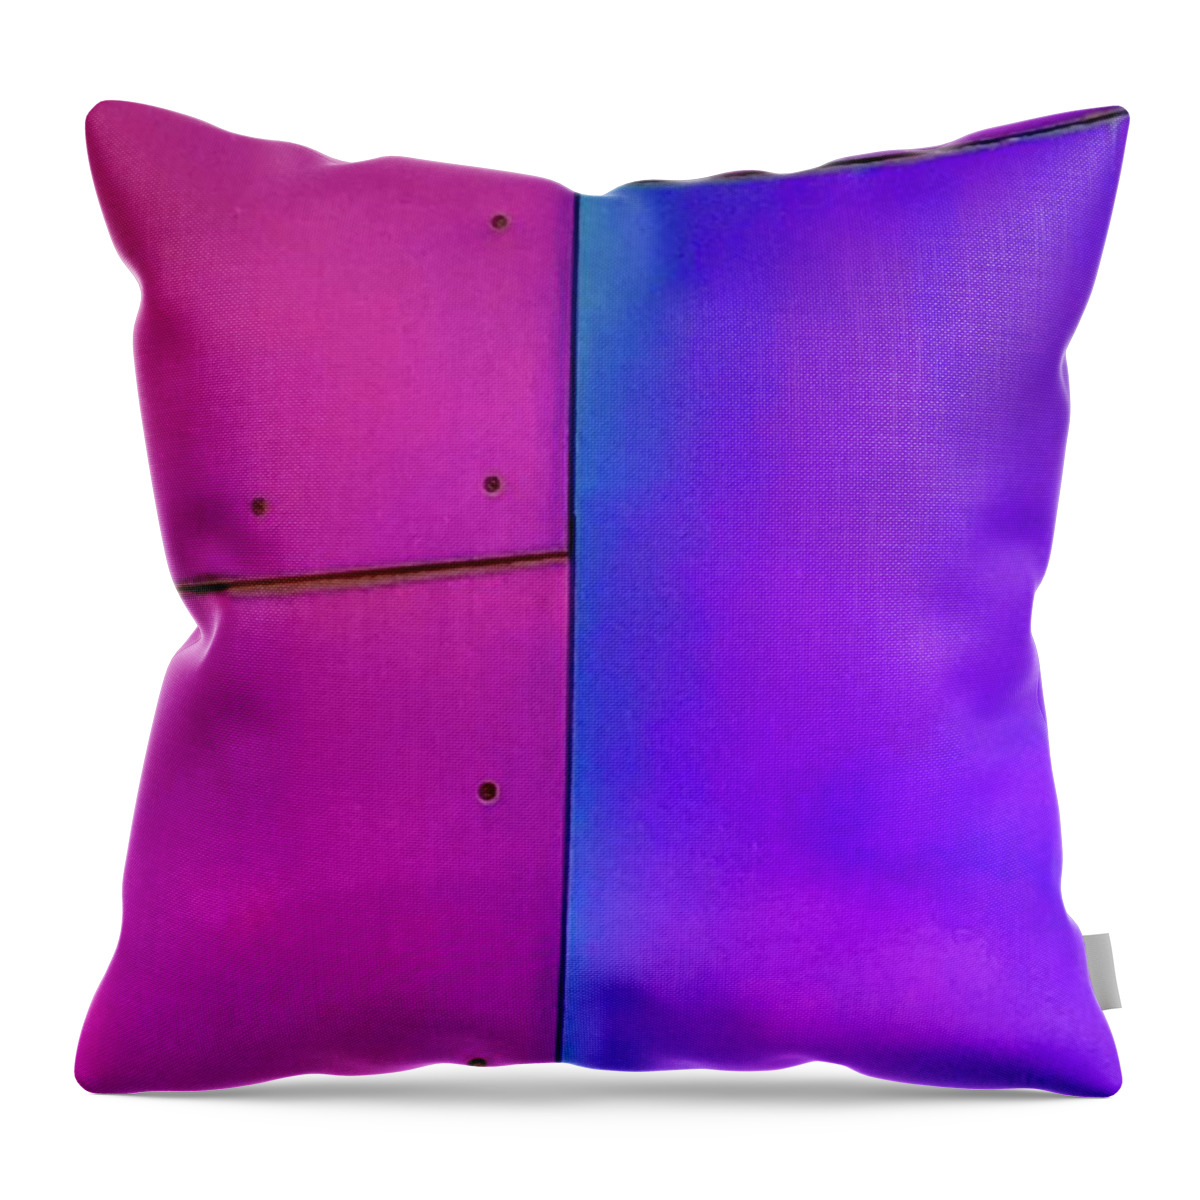 Vibrant Color Reflected Light Frank Gehry Seattle Rock N Roll Museum Throw Pillow featuring the photograph Color Series 1-11 by J Doyne Miller